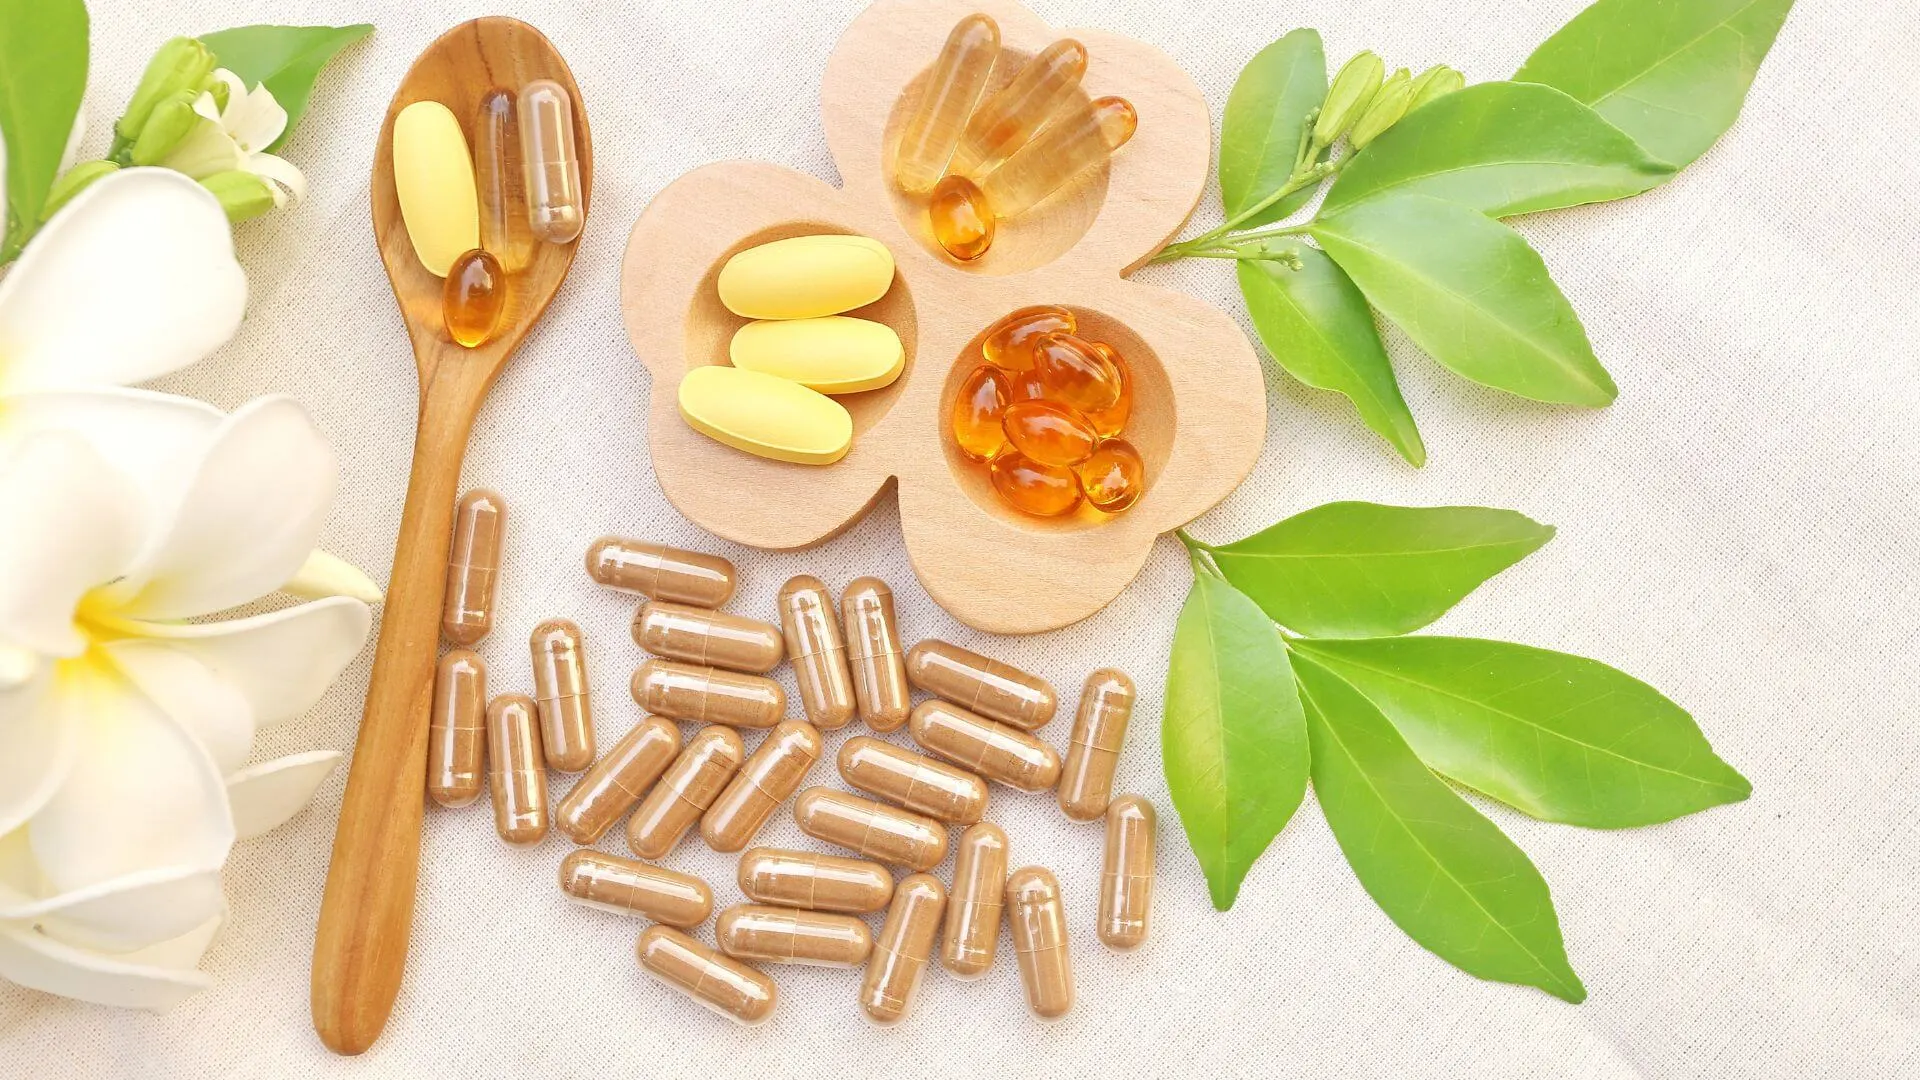 Why Choose an Online Chemist to Buy Natural Supplements And Other Health Products